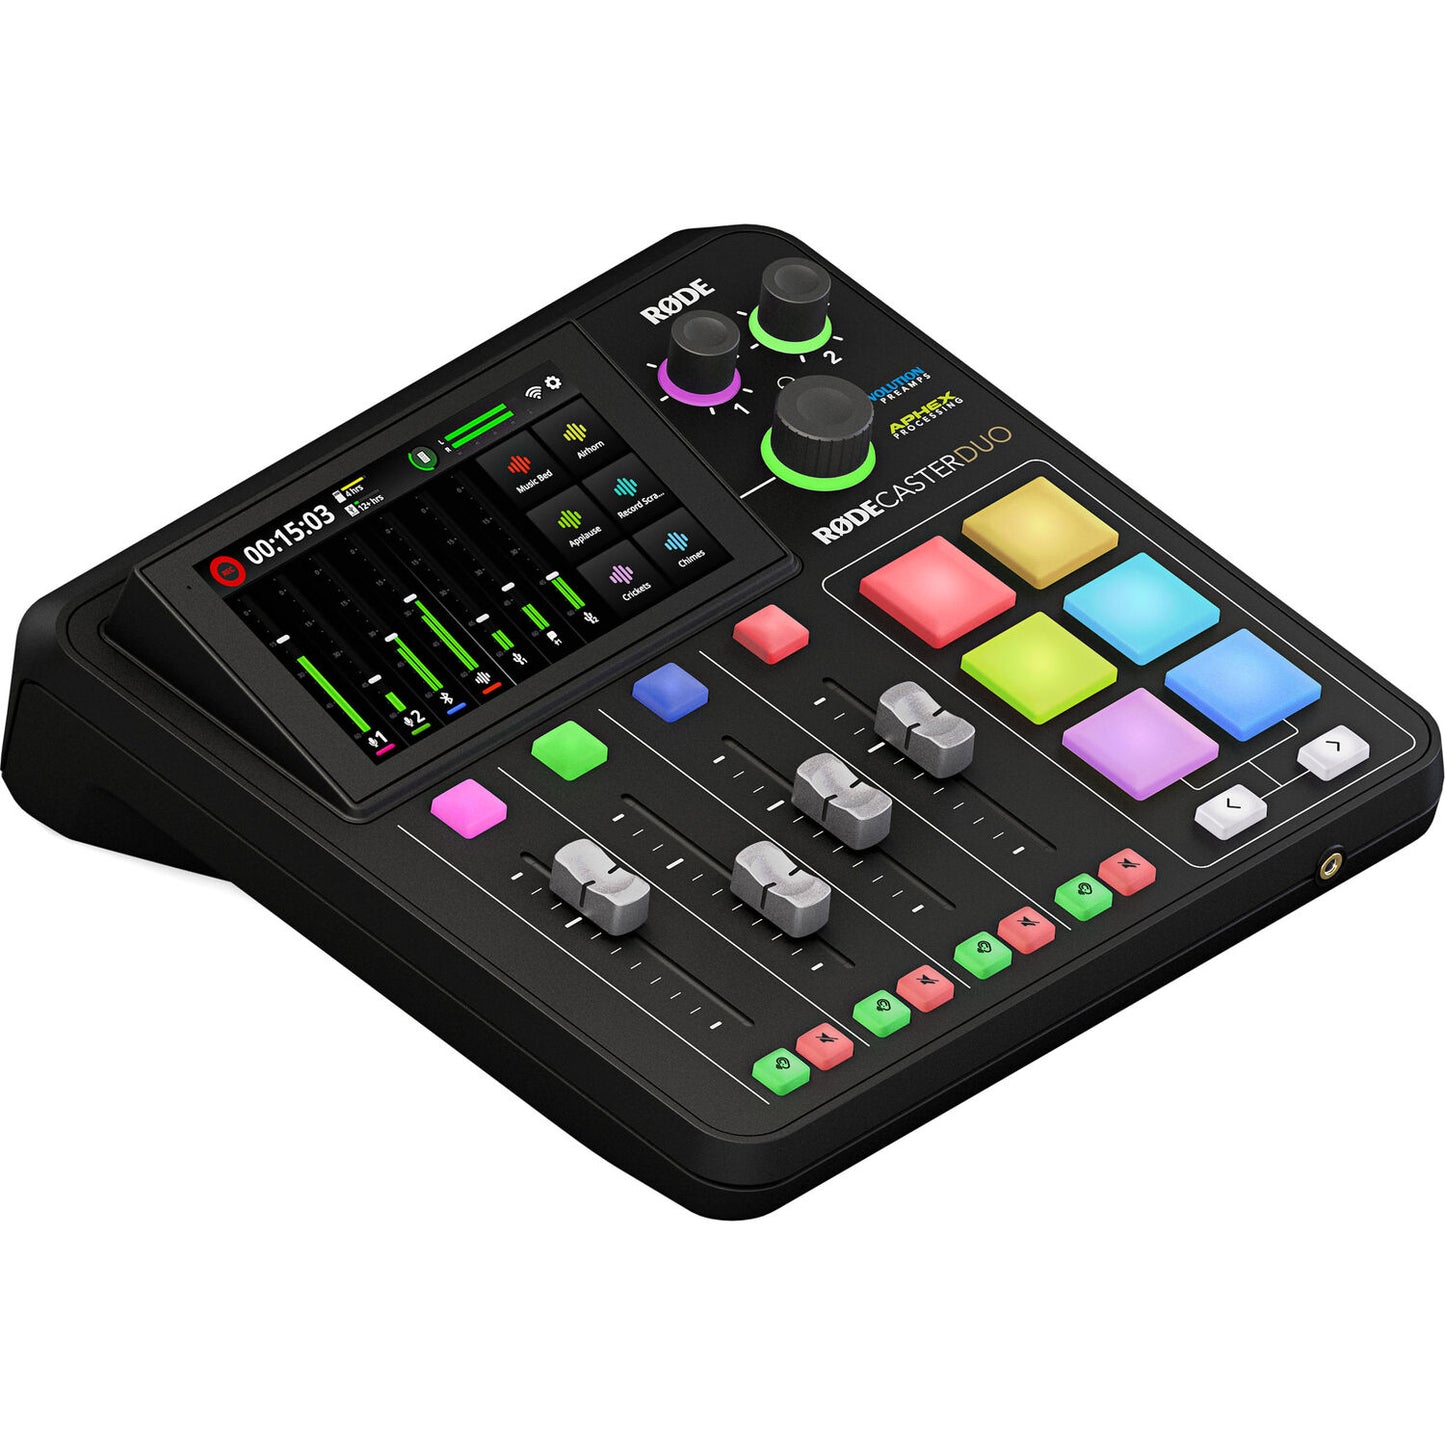 Rode RodeCaster Duo Streaming Mixer